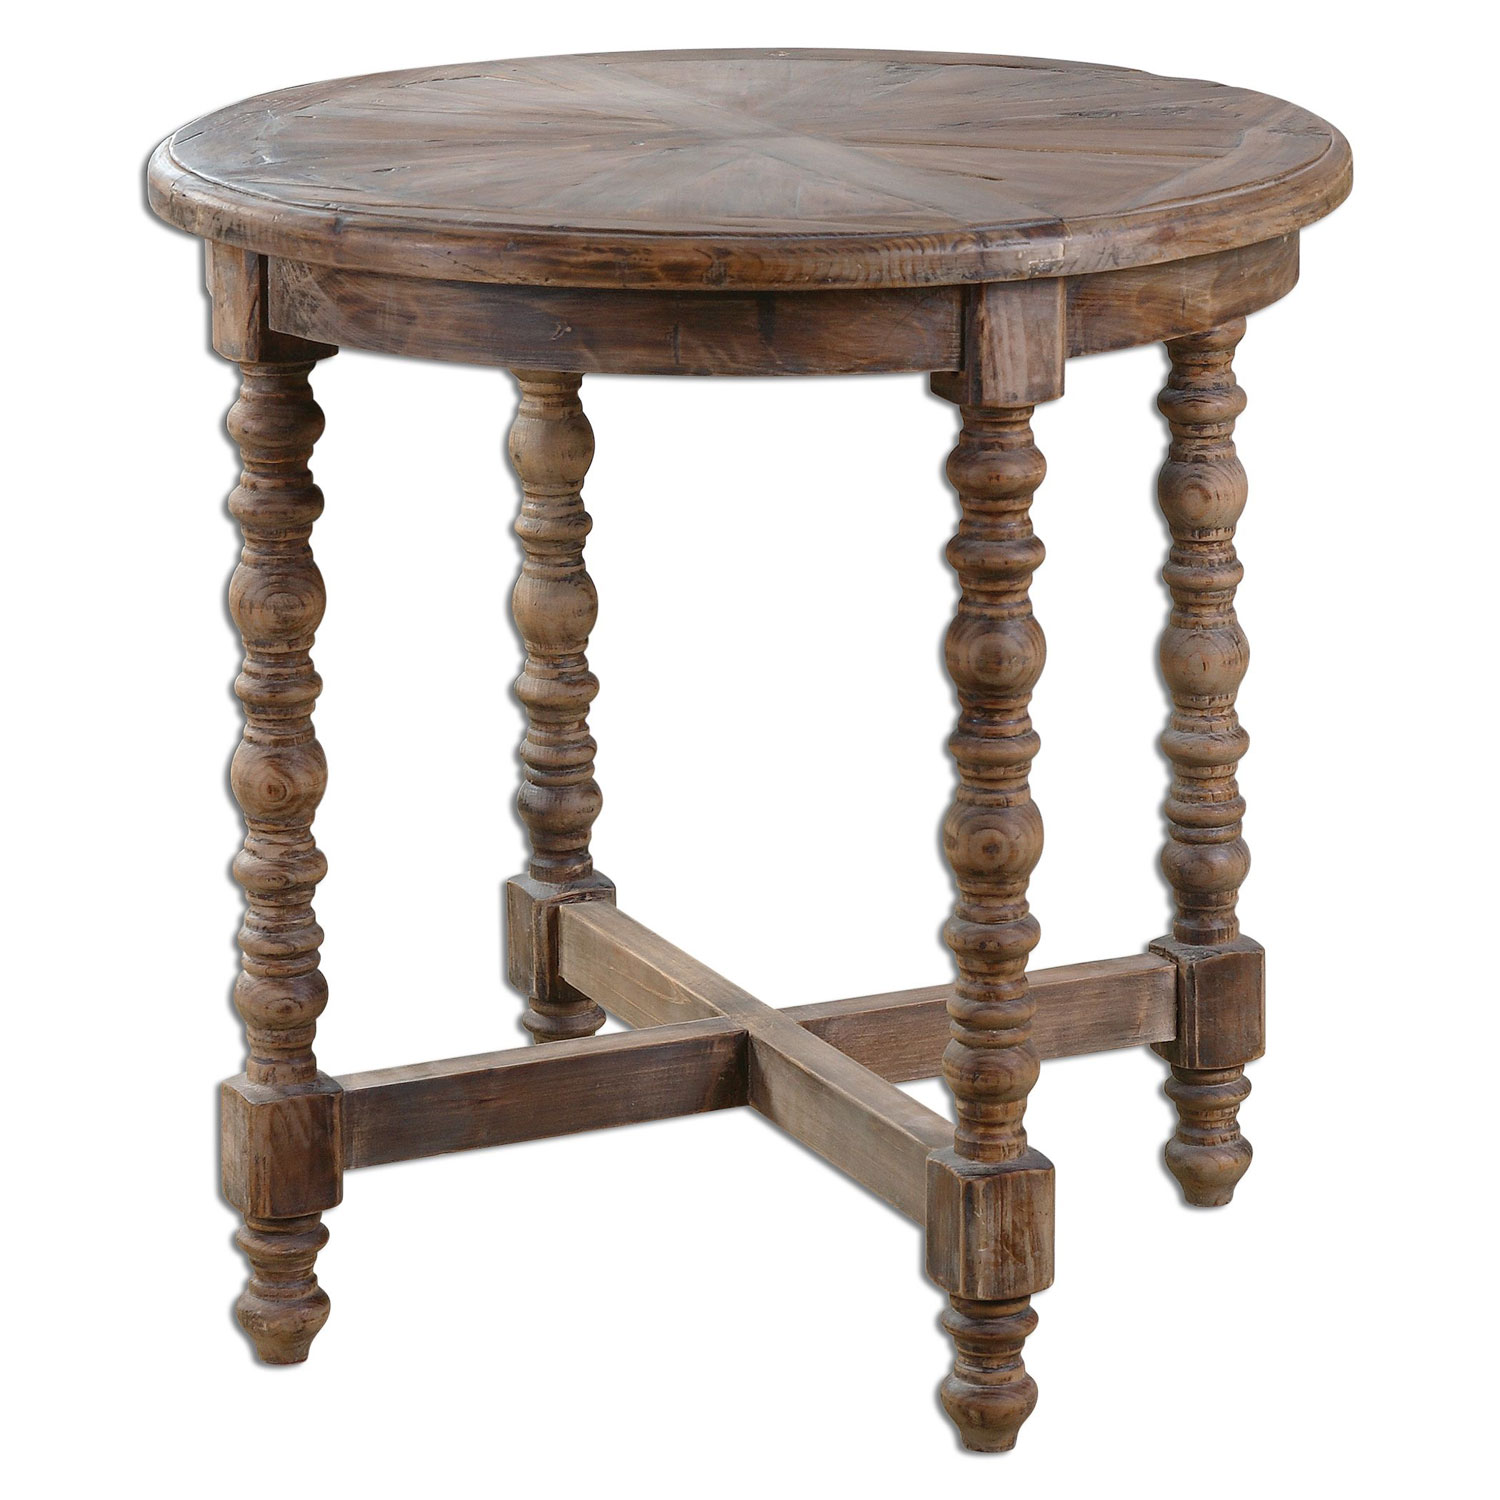 uttermost samuelle reclaimed fir wood end table bellacor accent tables hover zoom half moon ikea wrought iron glass kohls lamps rattan matching living room furniture nautical